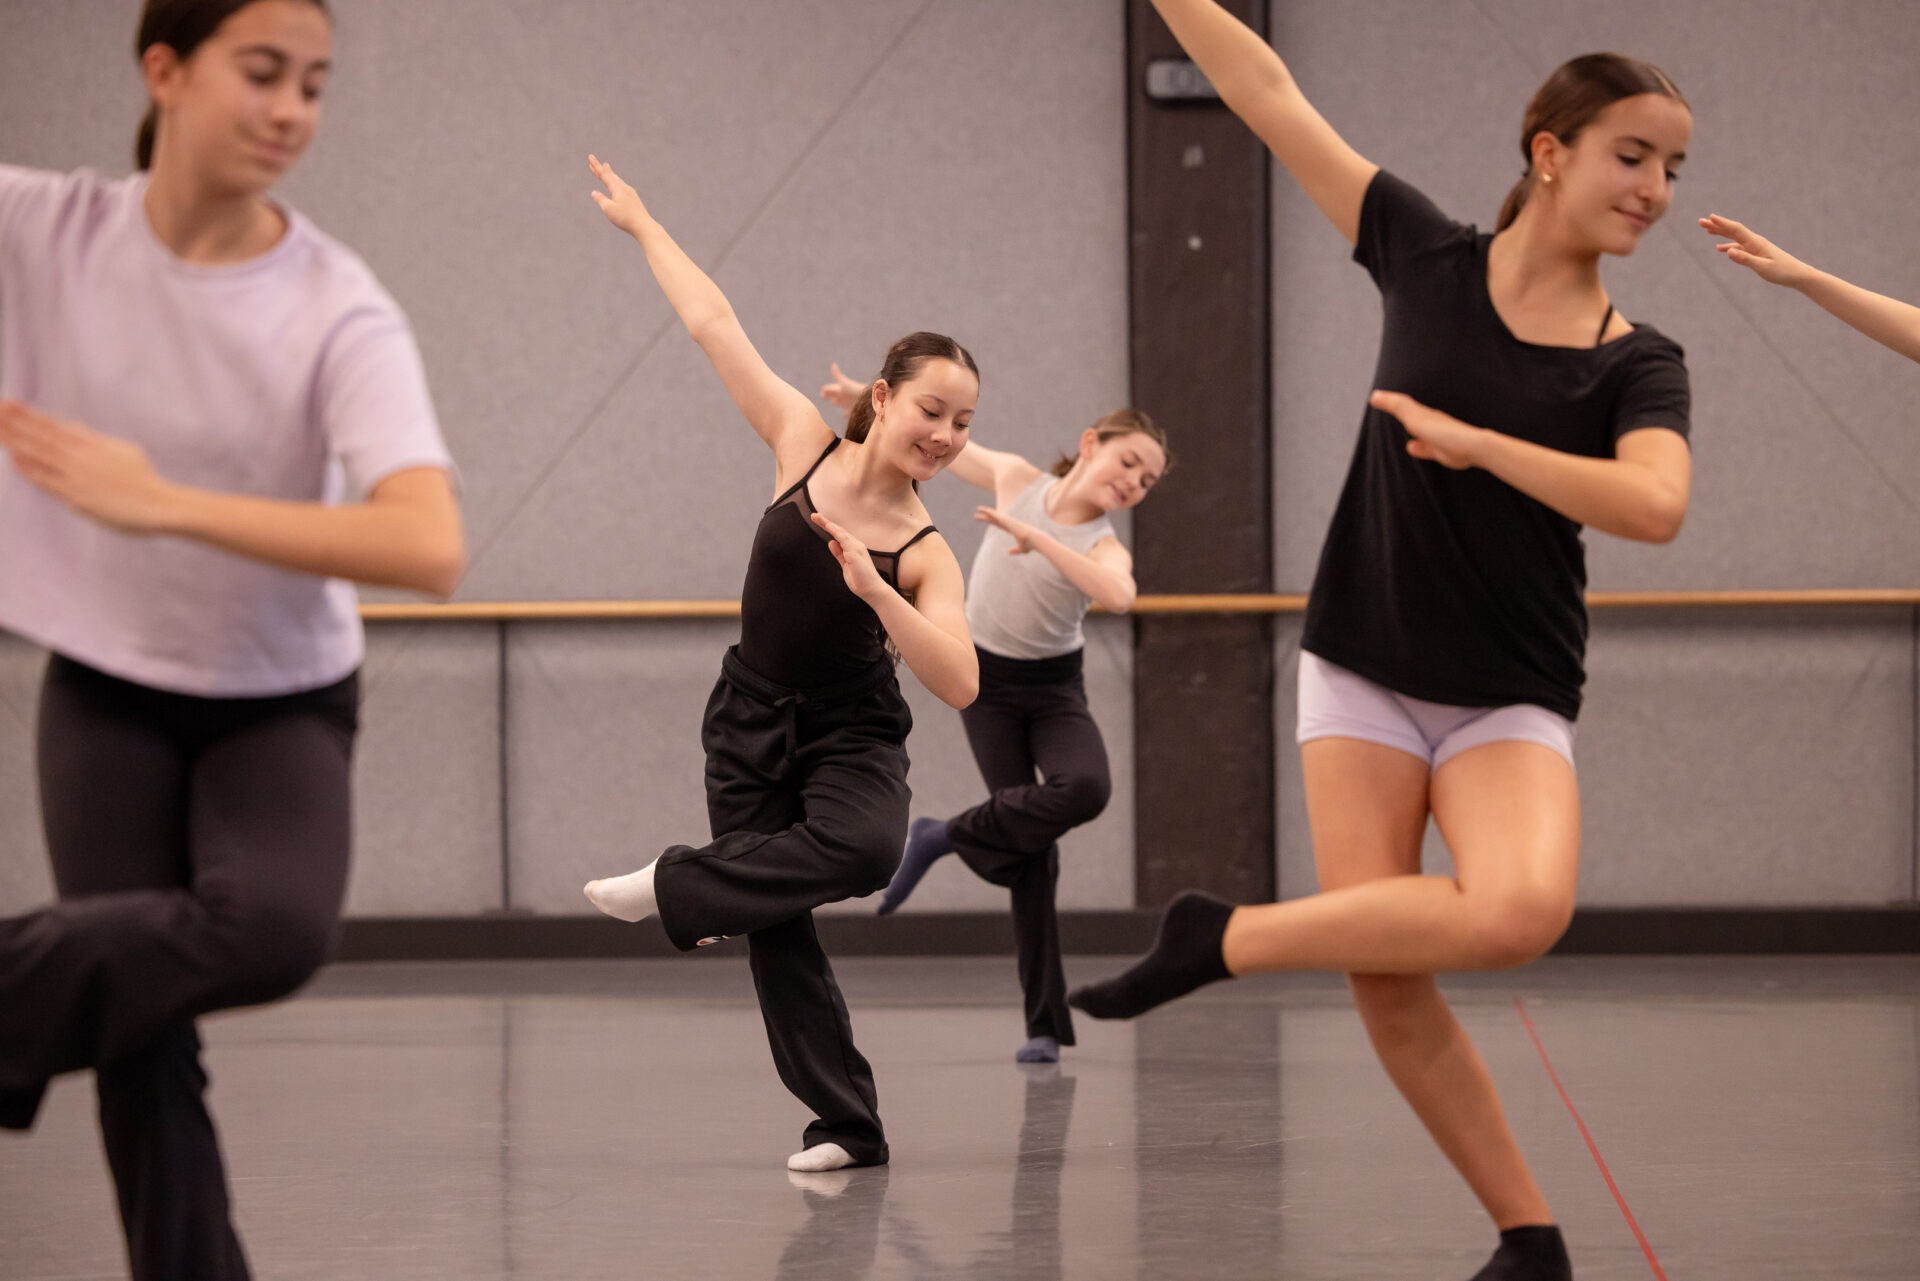 Junior Youth Ensemble dancers taking contemporary class at Sydney Dance Company studios.